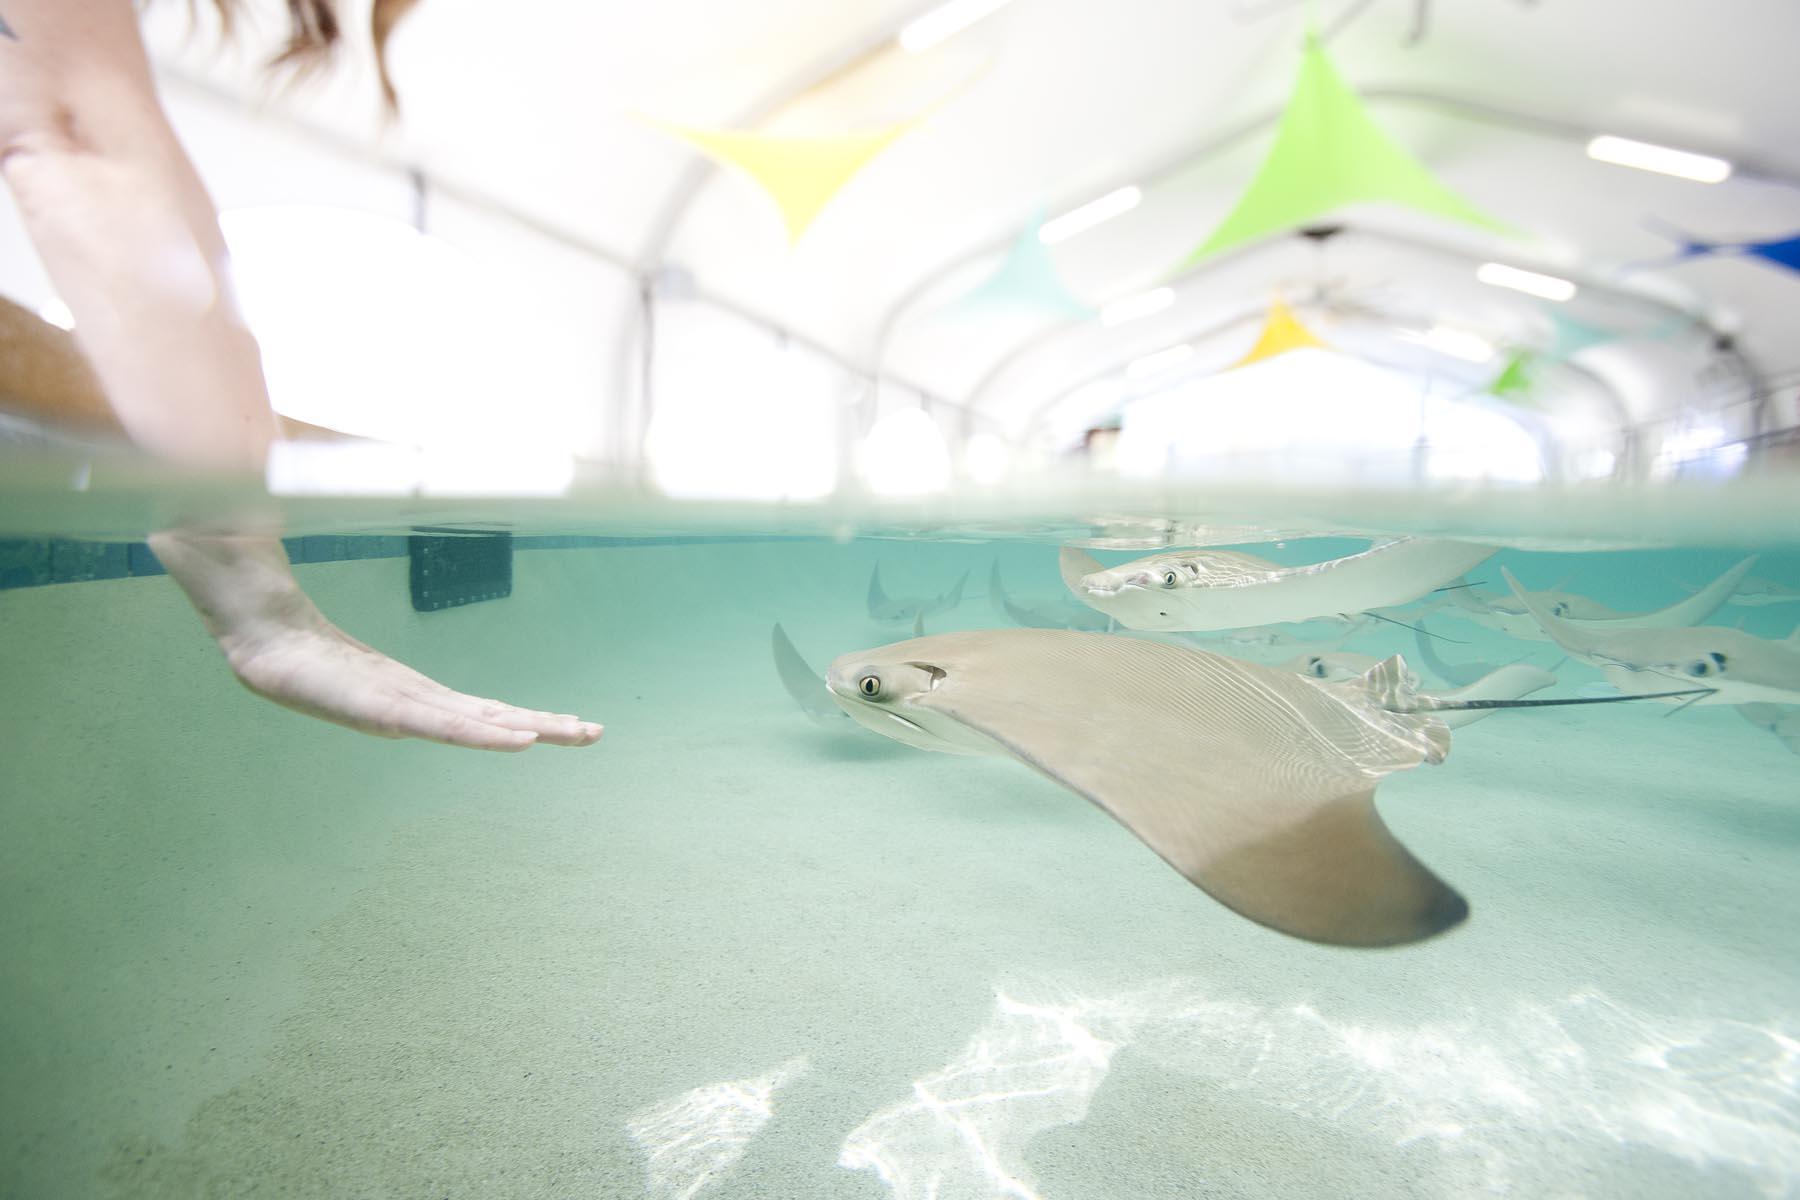 Visitors can get up close and personal with cownose rays at Shedd Aquarium's seasonal exhibit "Stingray Touch." (Courtesy Shedd Aquarium)